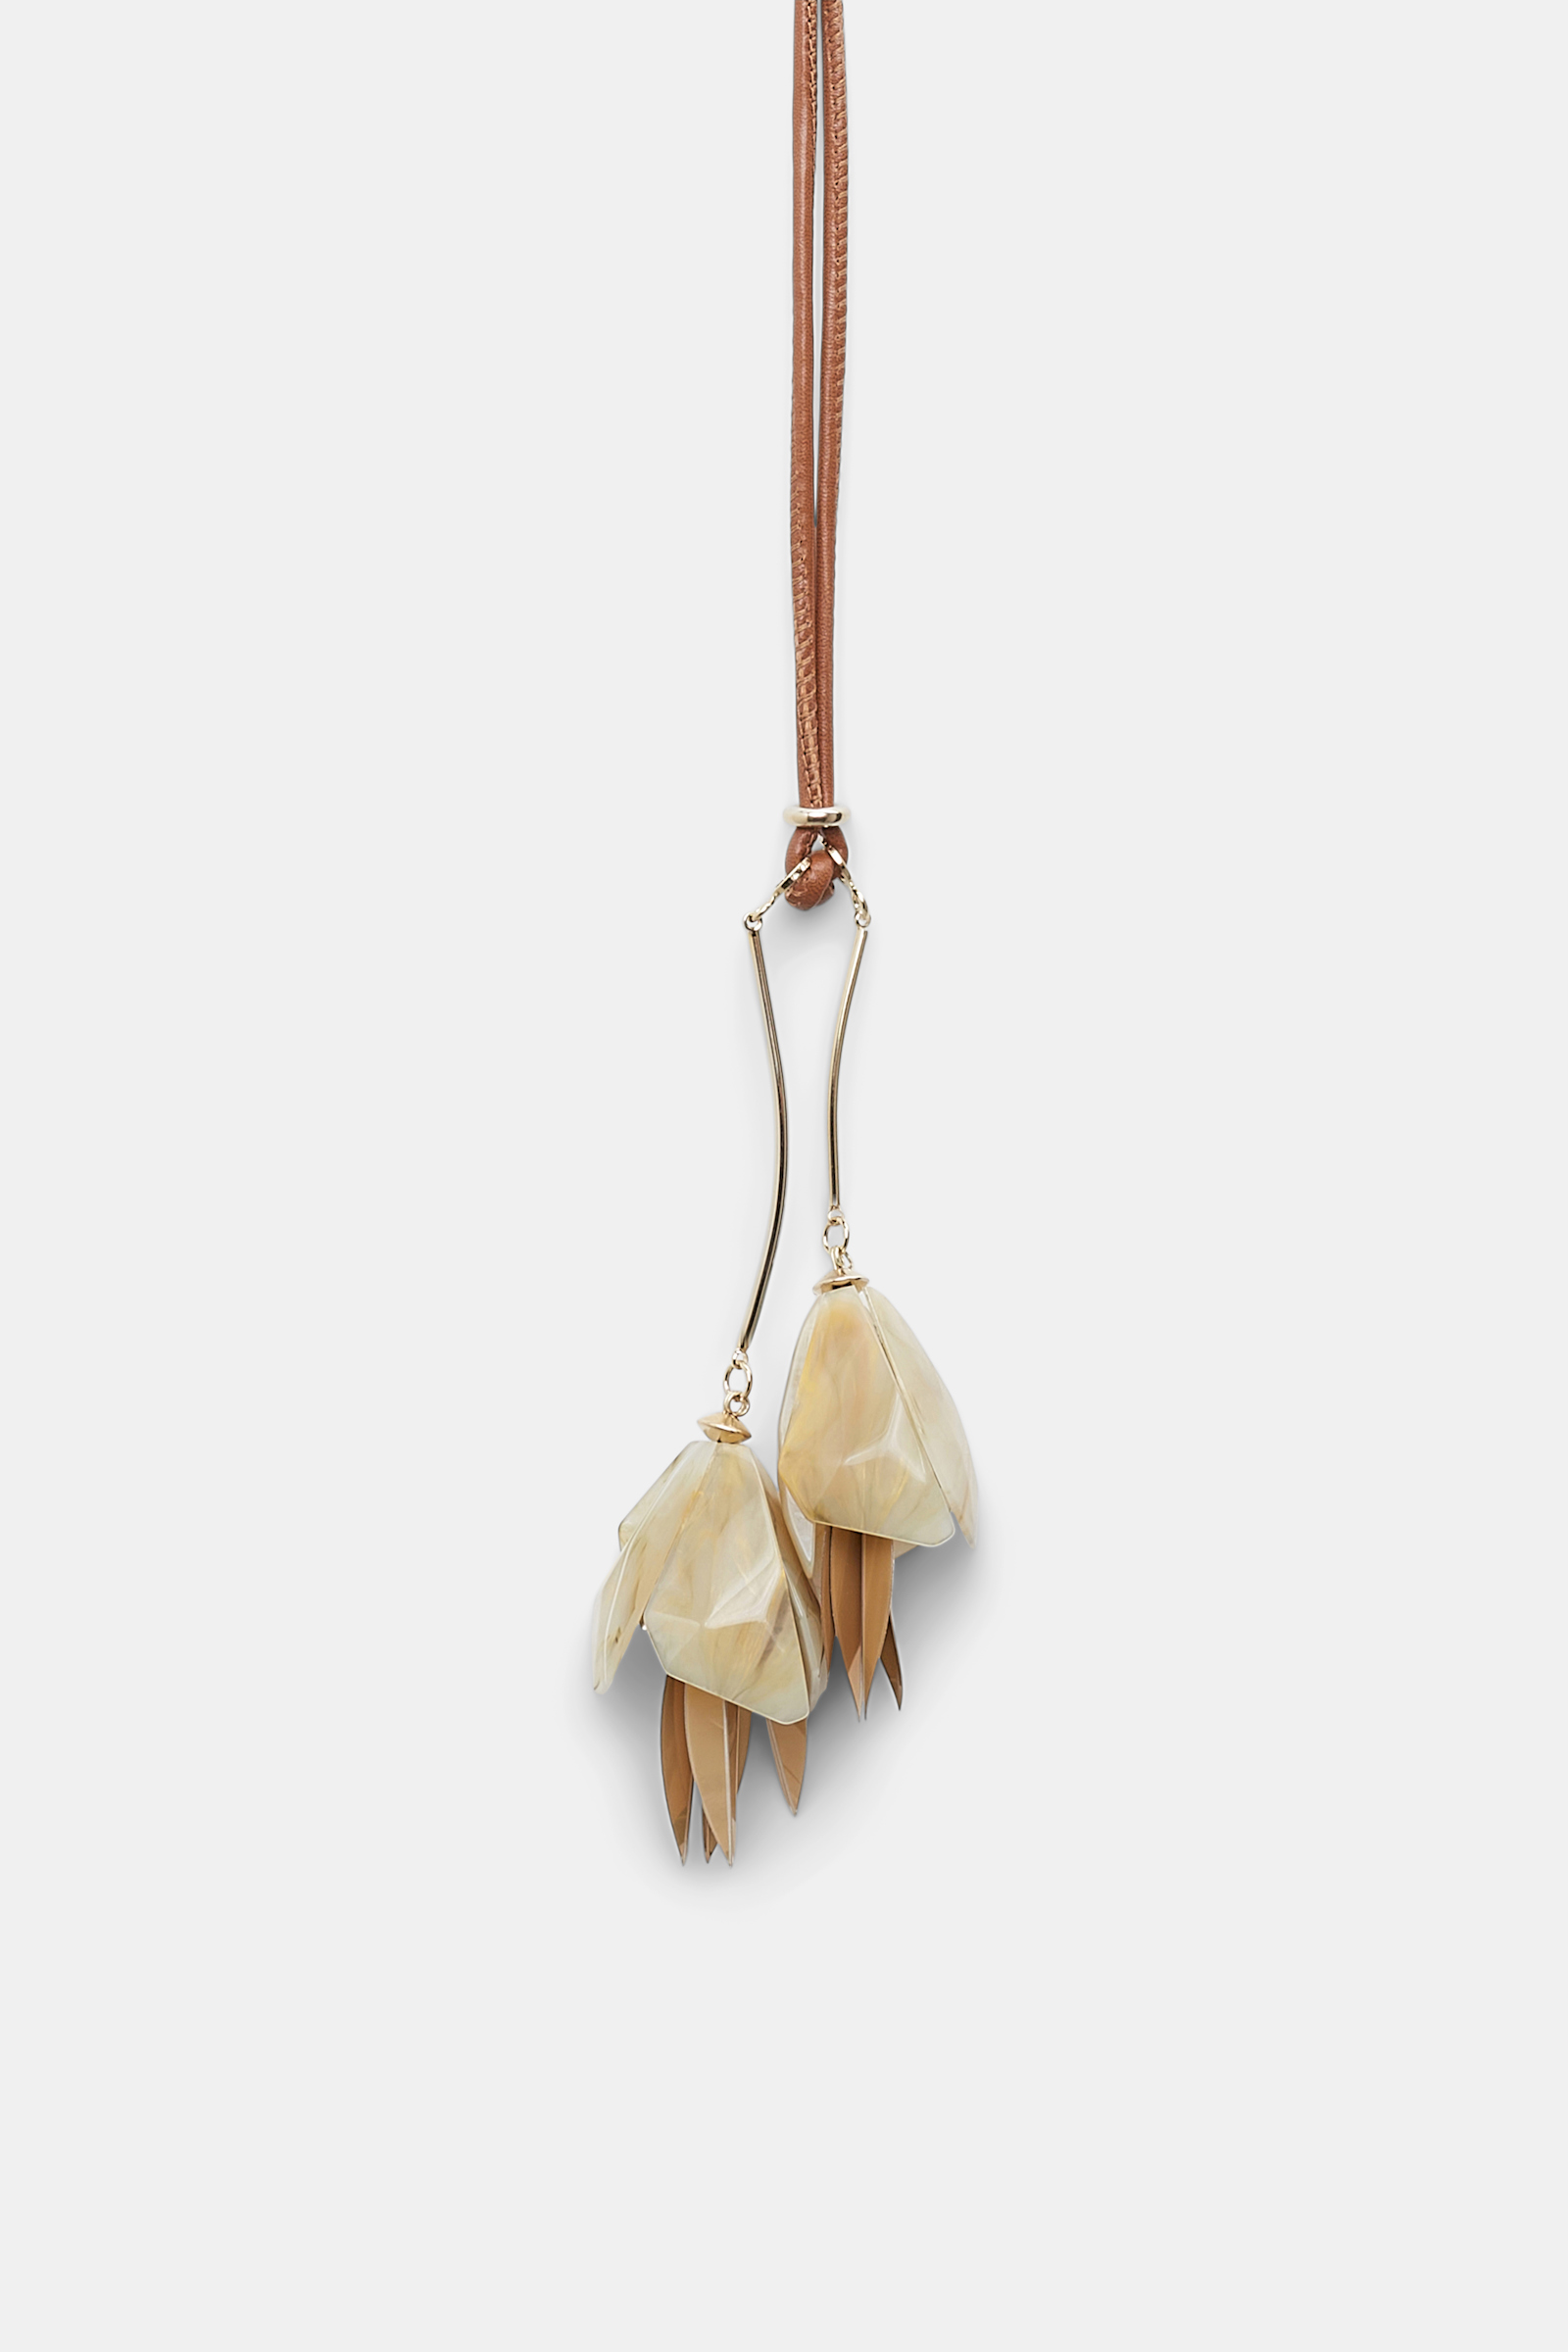 Dorothee Schumacher Necklace with hanging flower pendant on leather cord medium camel